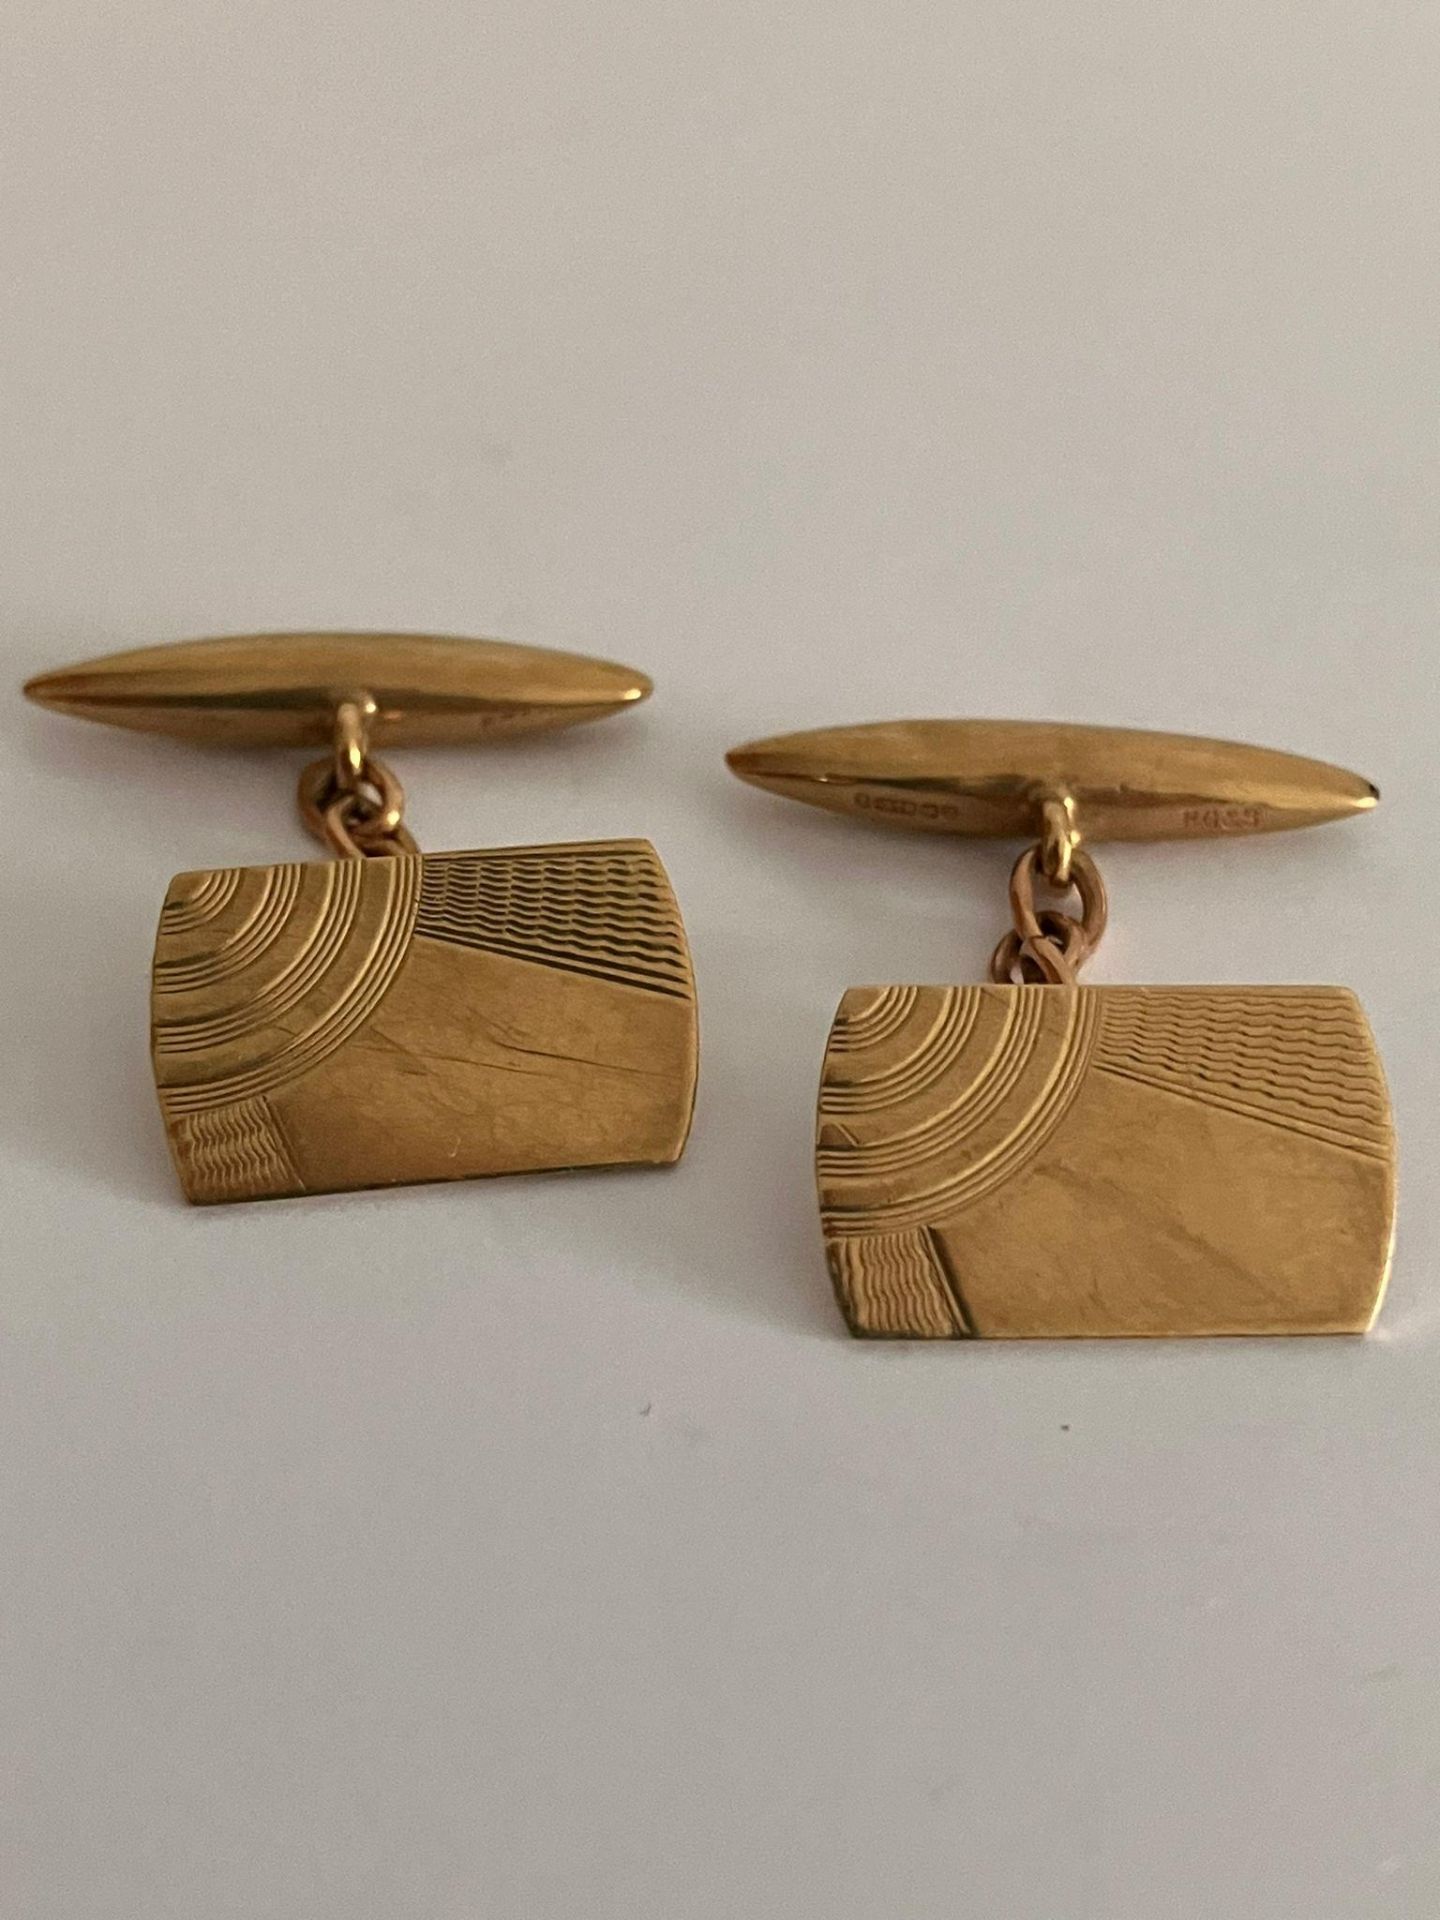 Vintage 9 carat YELLOW GOLD CUFFLINKS. Having art deco design, chain linked with torpedo ends.